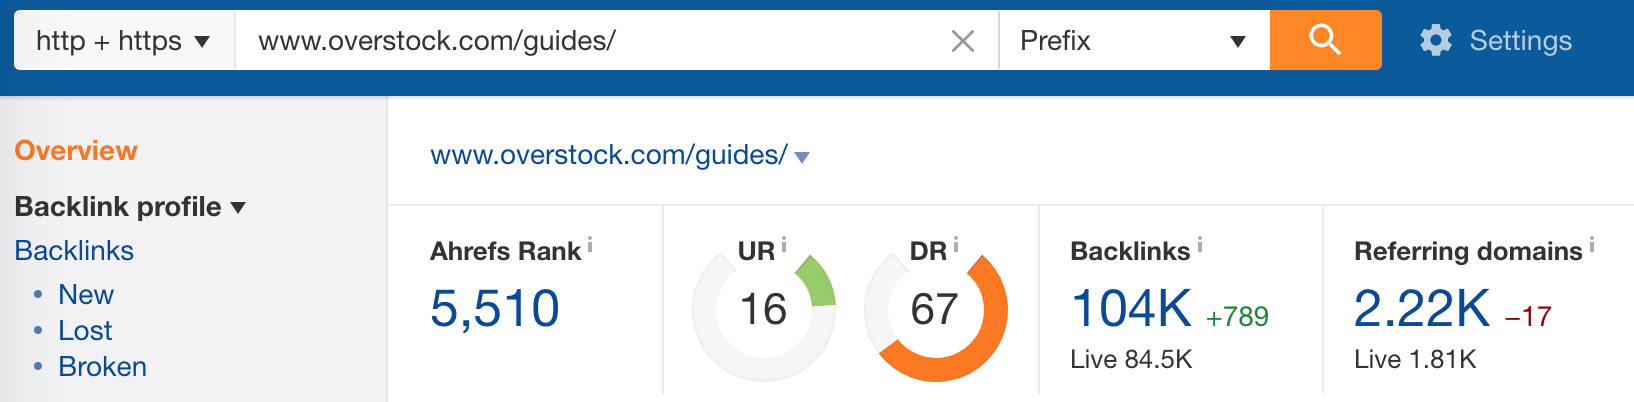 Screenshot showing ahrefs results for a site